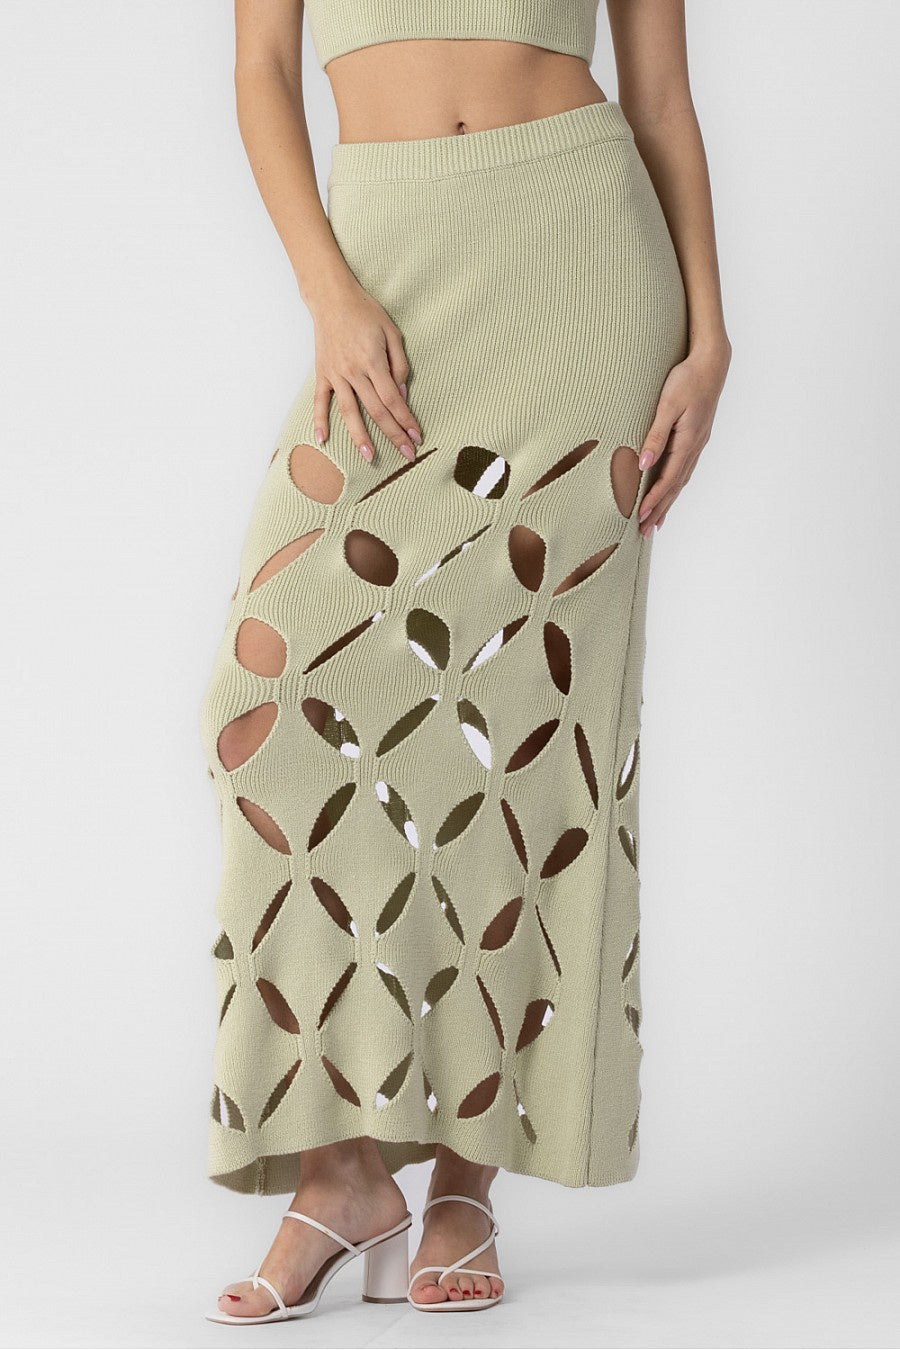 Midi skirt with cut outs in the color sage.